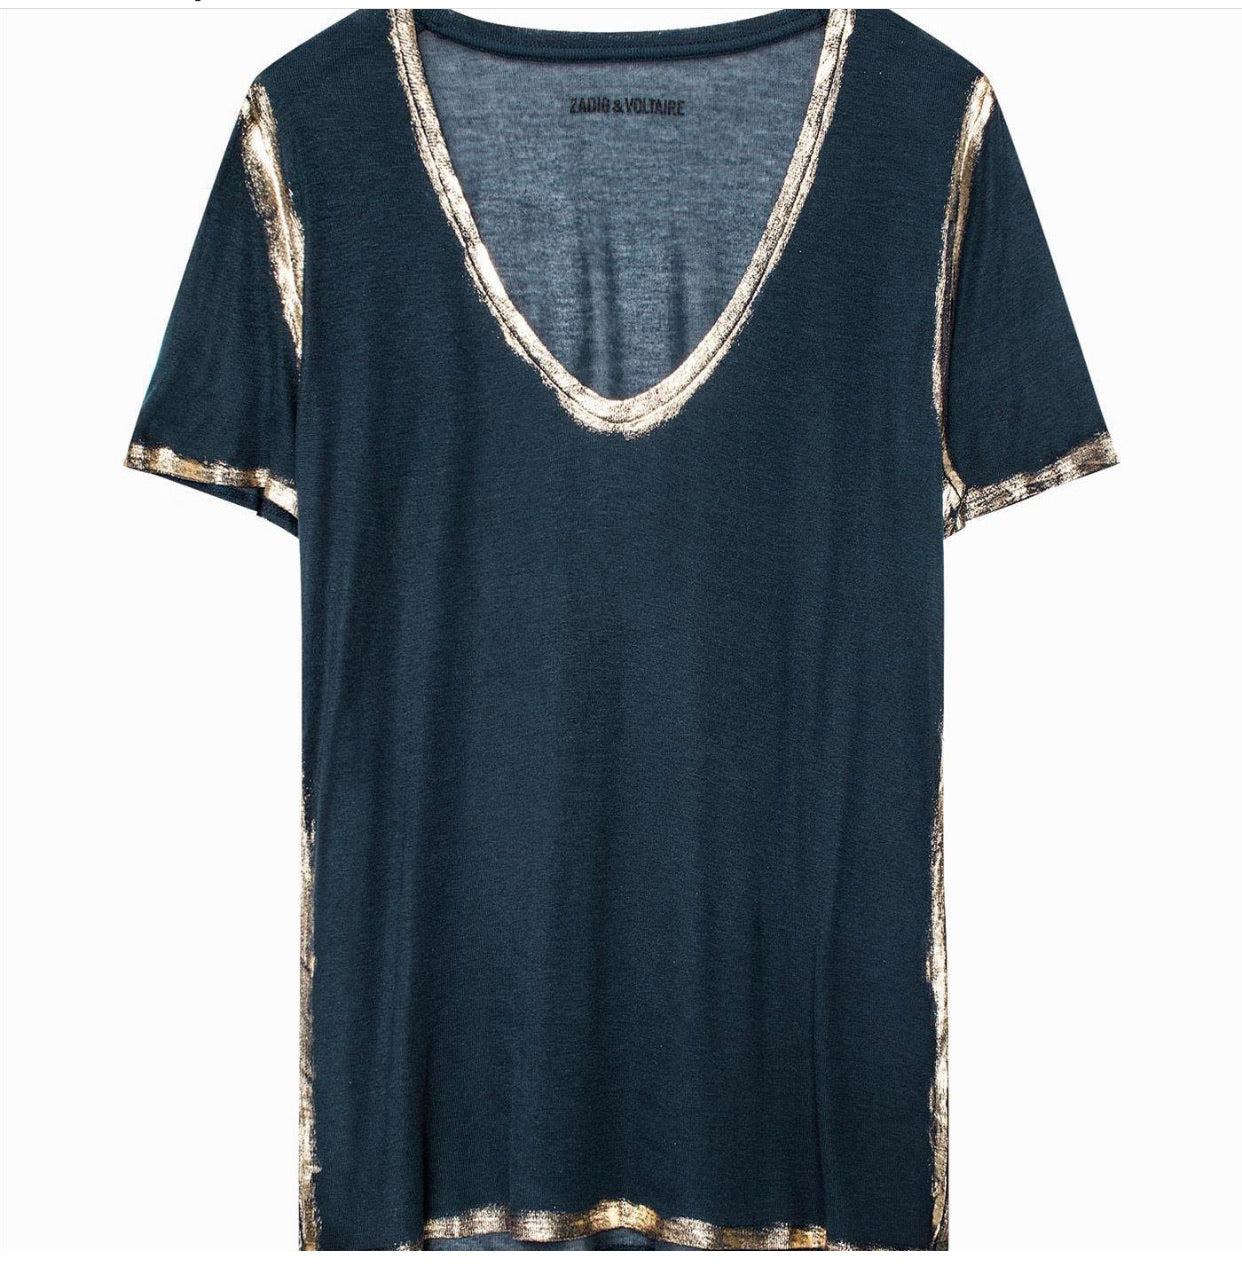 Zadig & Voltaire Tino Foil Tee